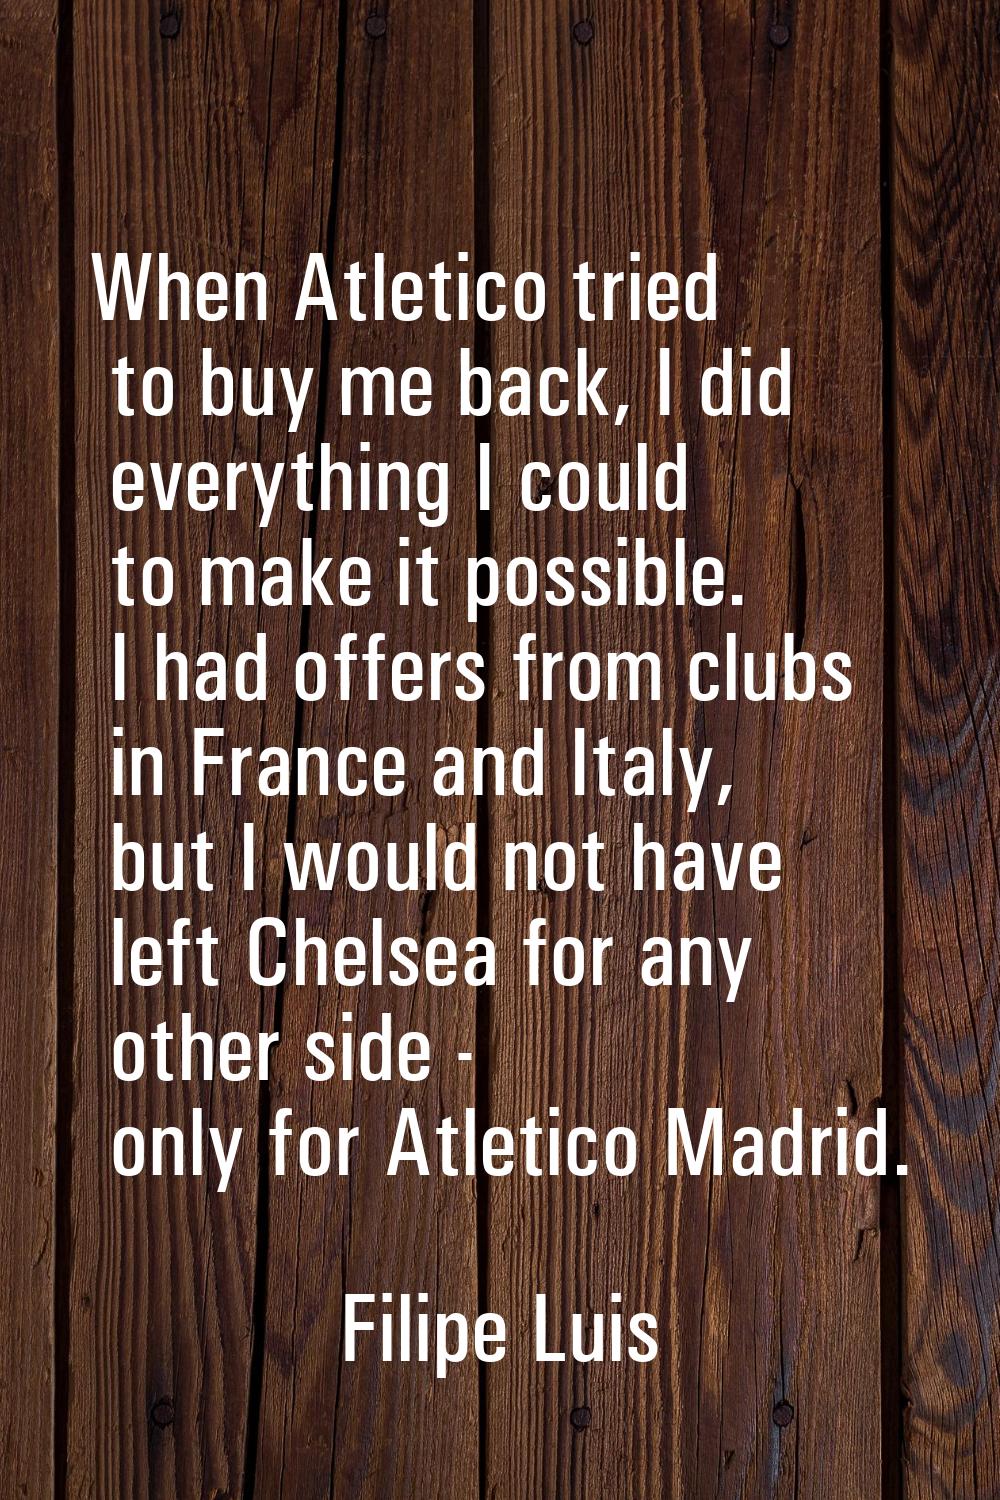 When Atletico tried to buy me back, I did everything I could to make it possible. I had offers from